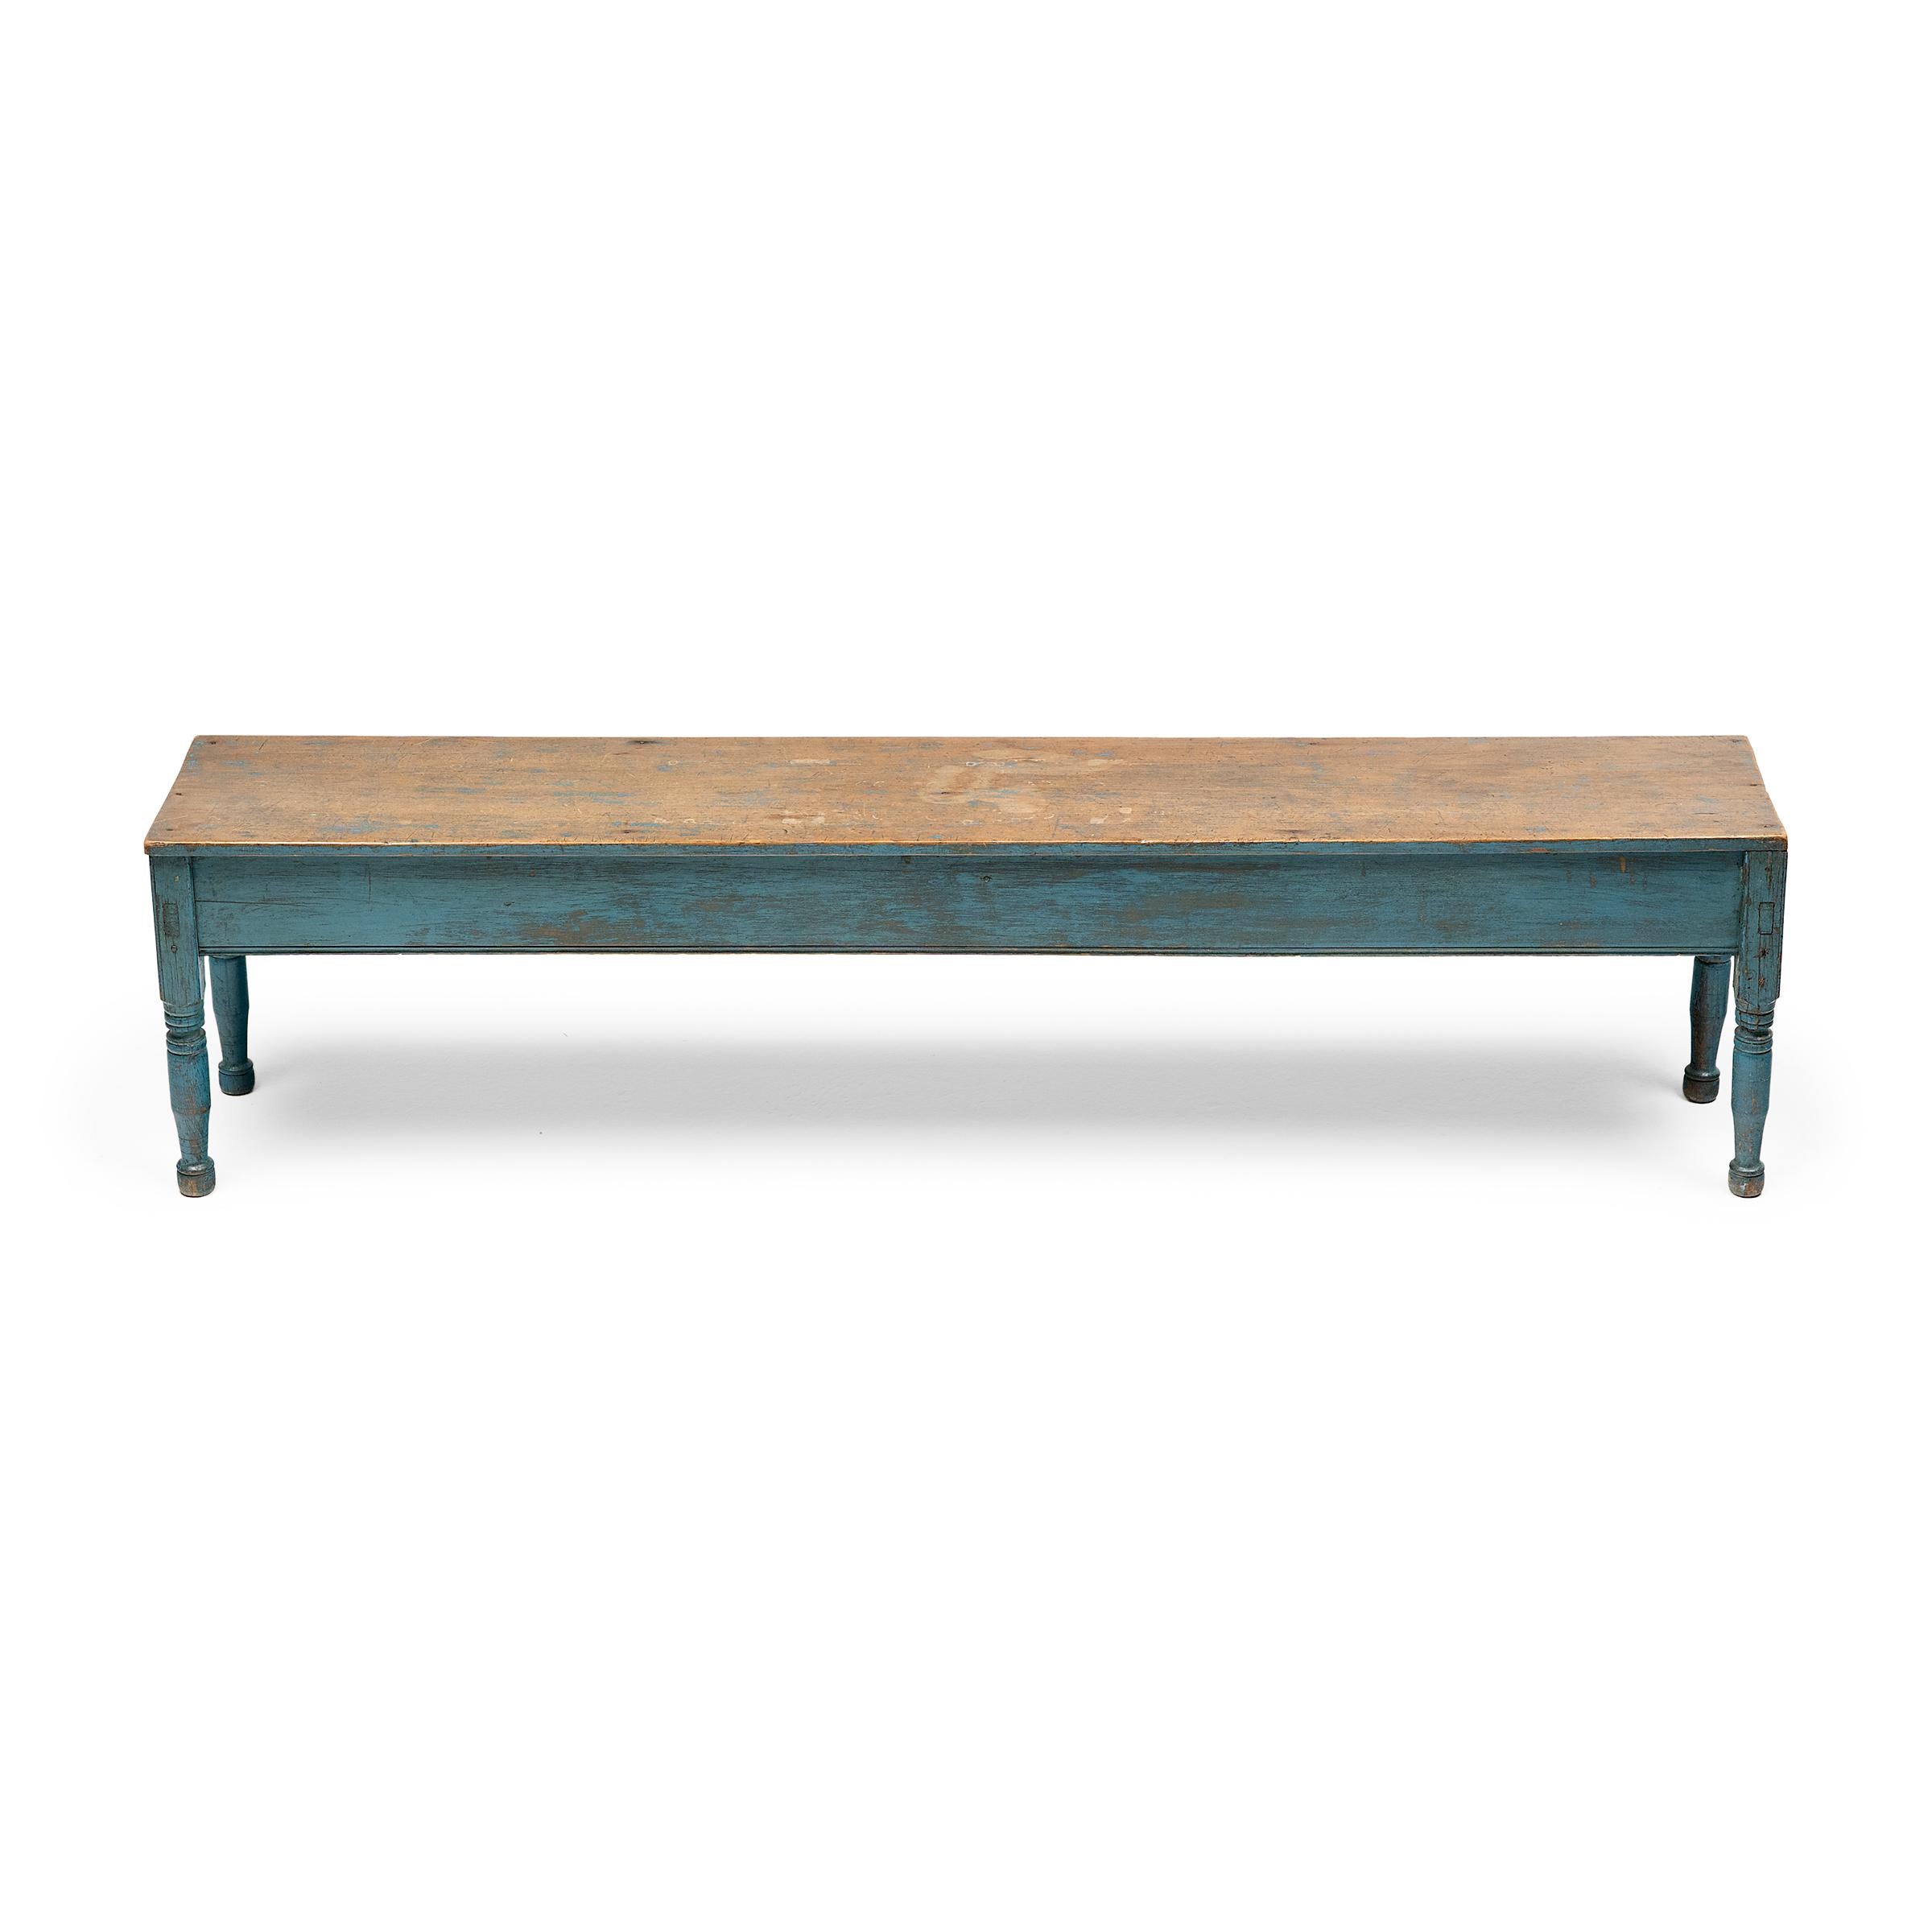 Rustic Blue Painted Farmhouse Bench, c. 1900 For Sale